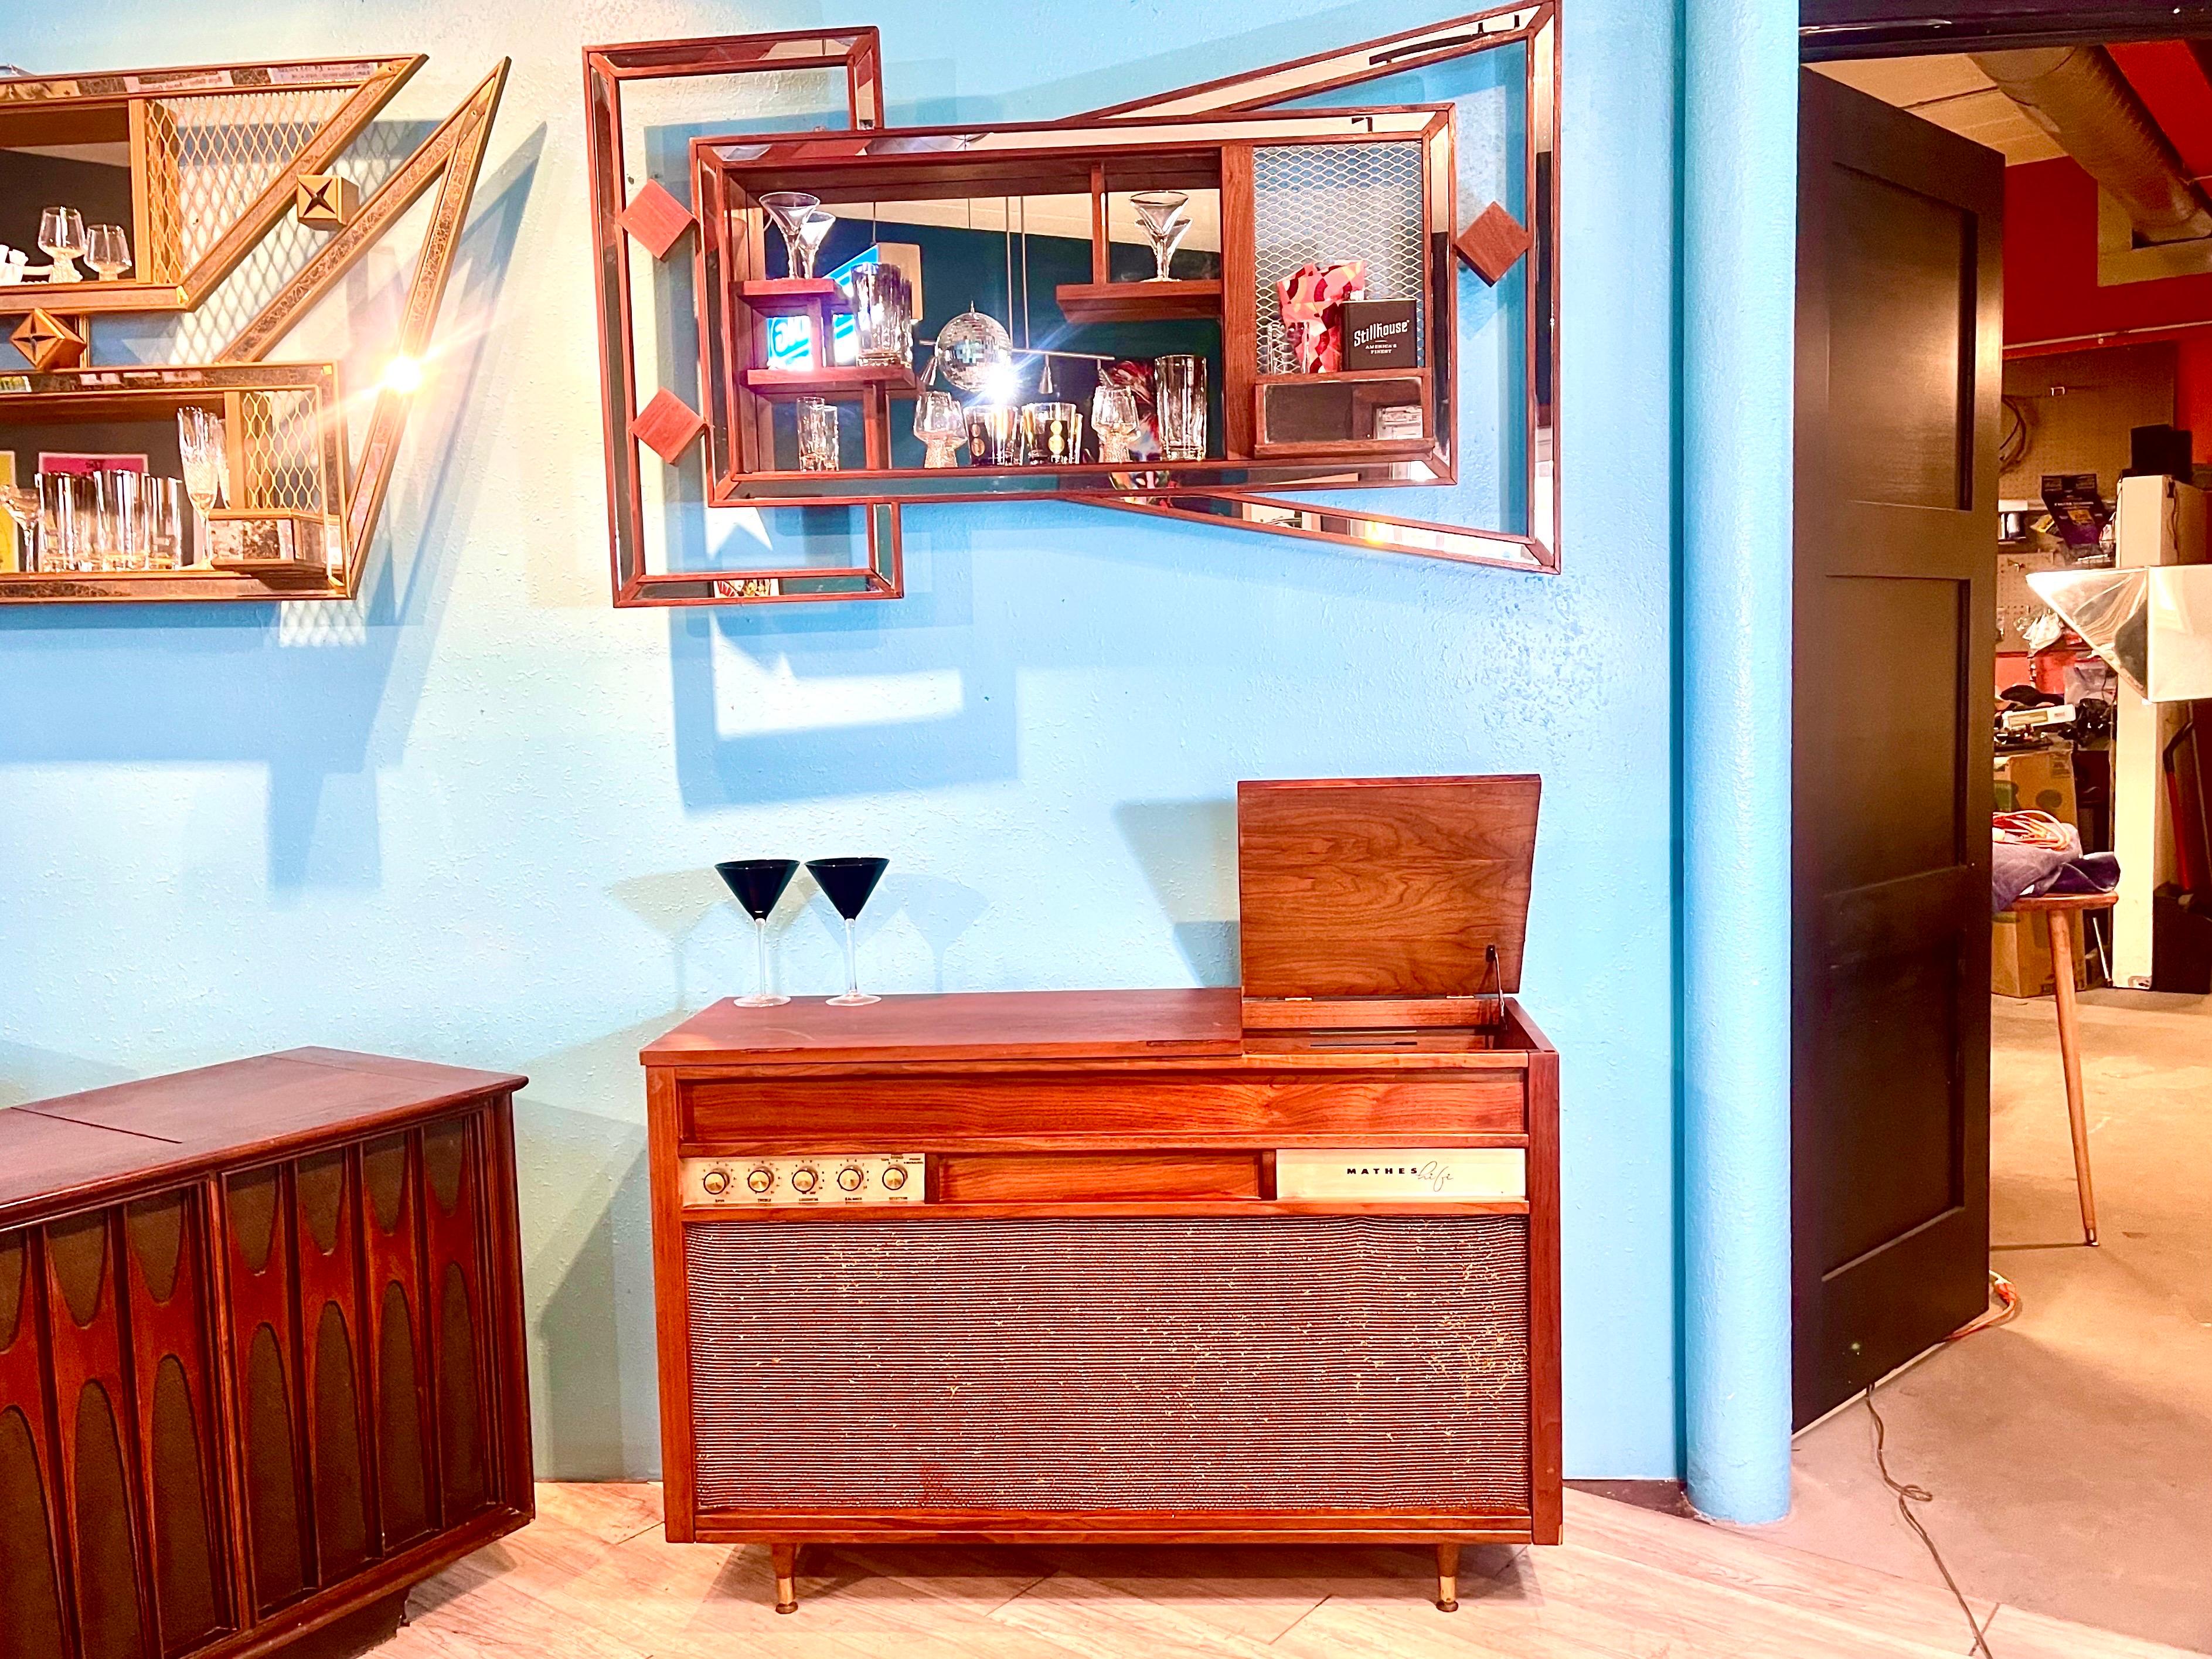 Thanks for looking at this refinished cabinet mid century stereo console.

This is a cherished and much respected stereo cabinet of the Madmen era. It shows great time period patina but refinished to a great looking piece. The original receiver is